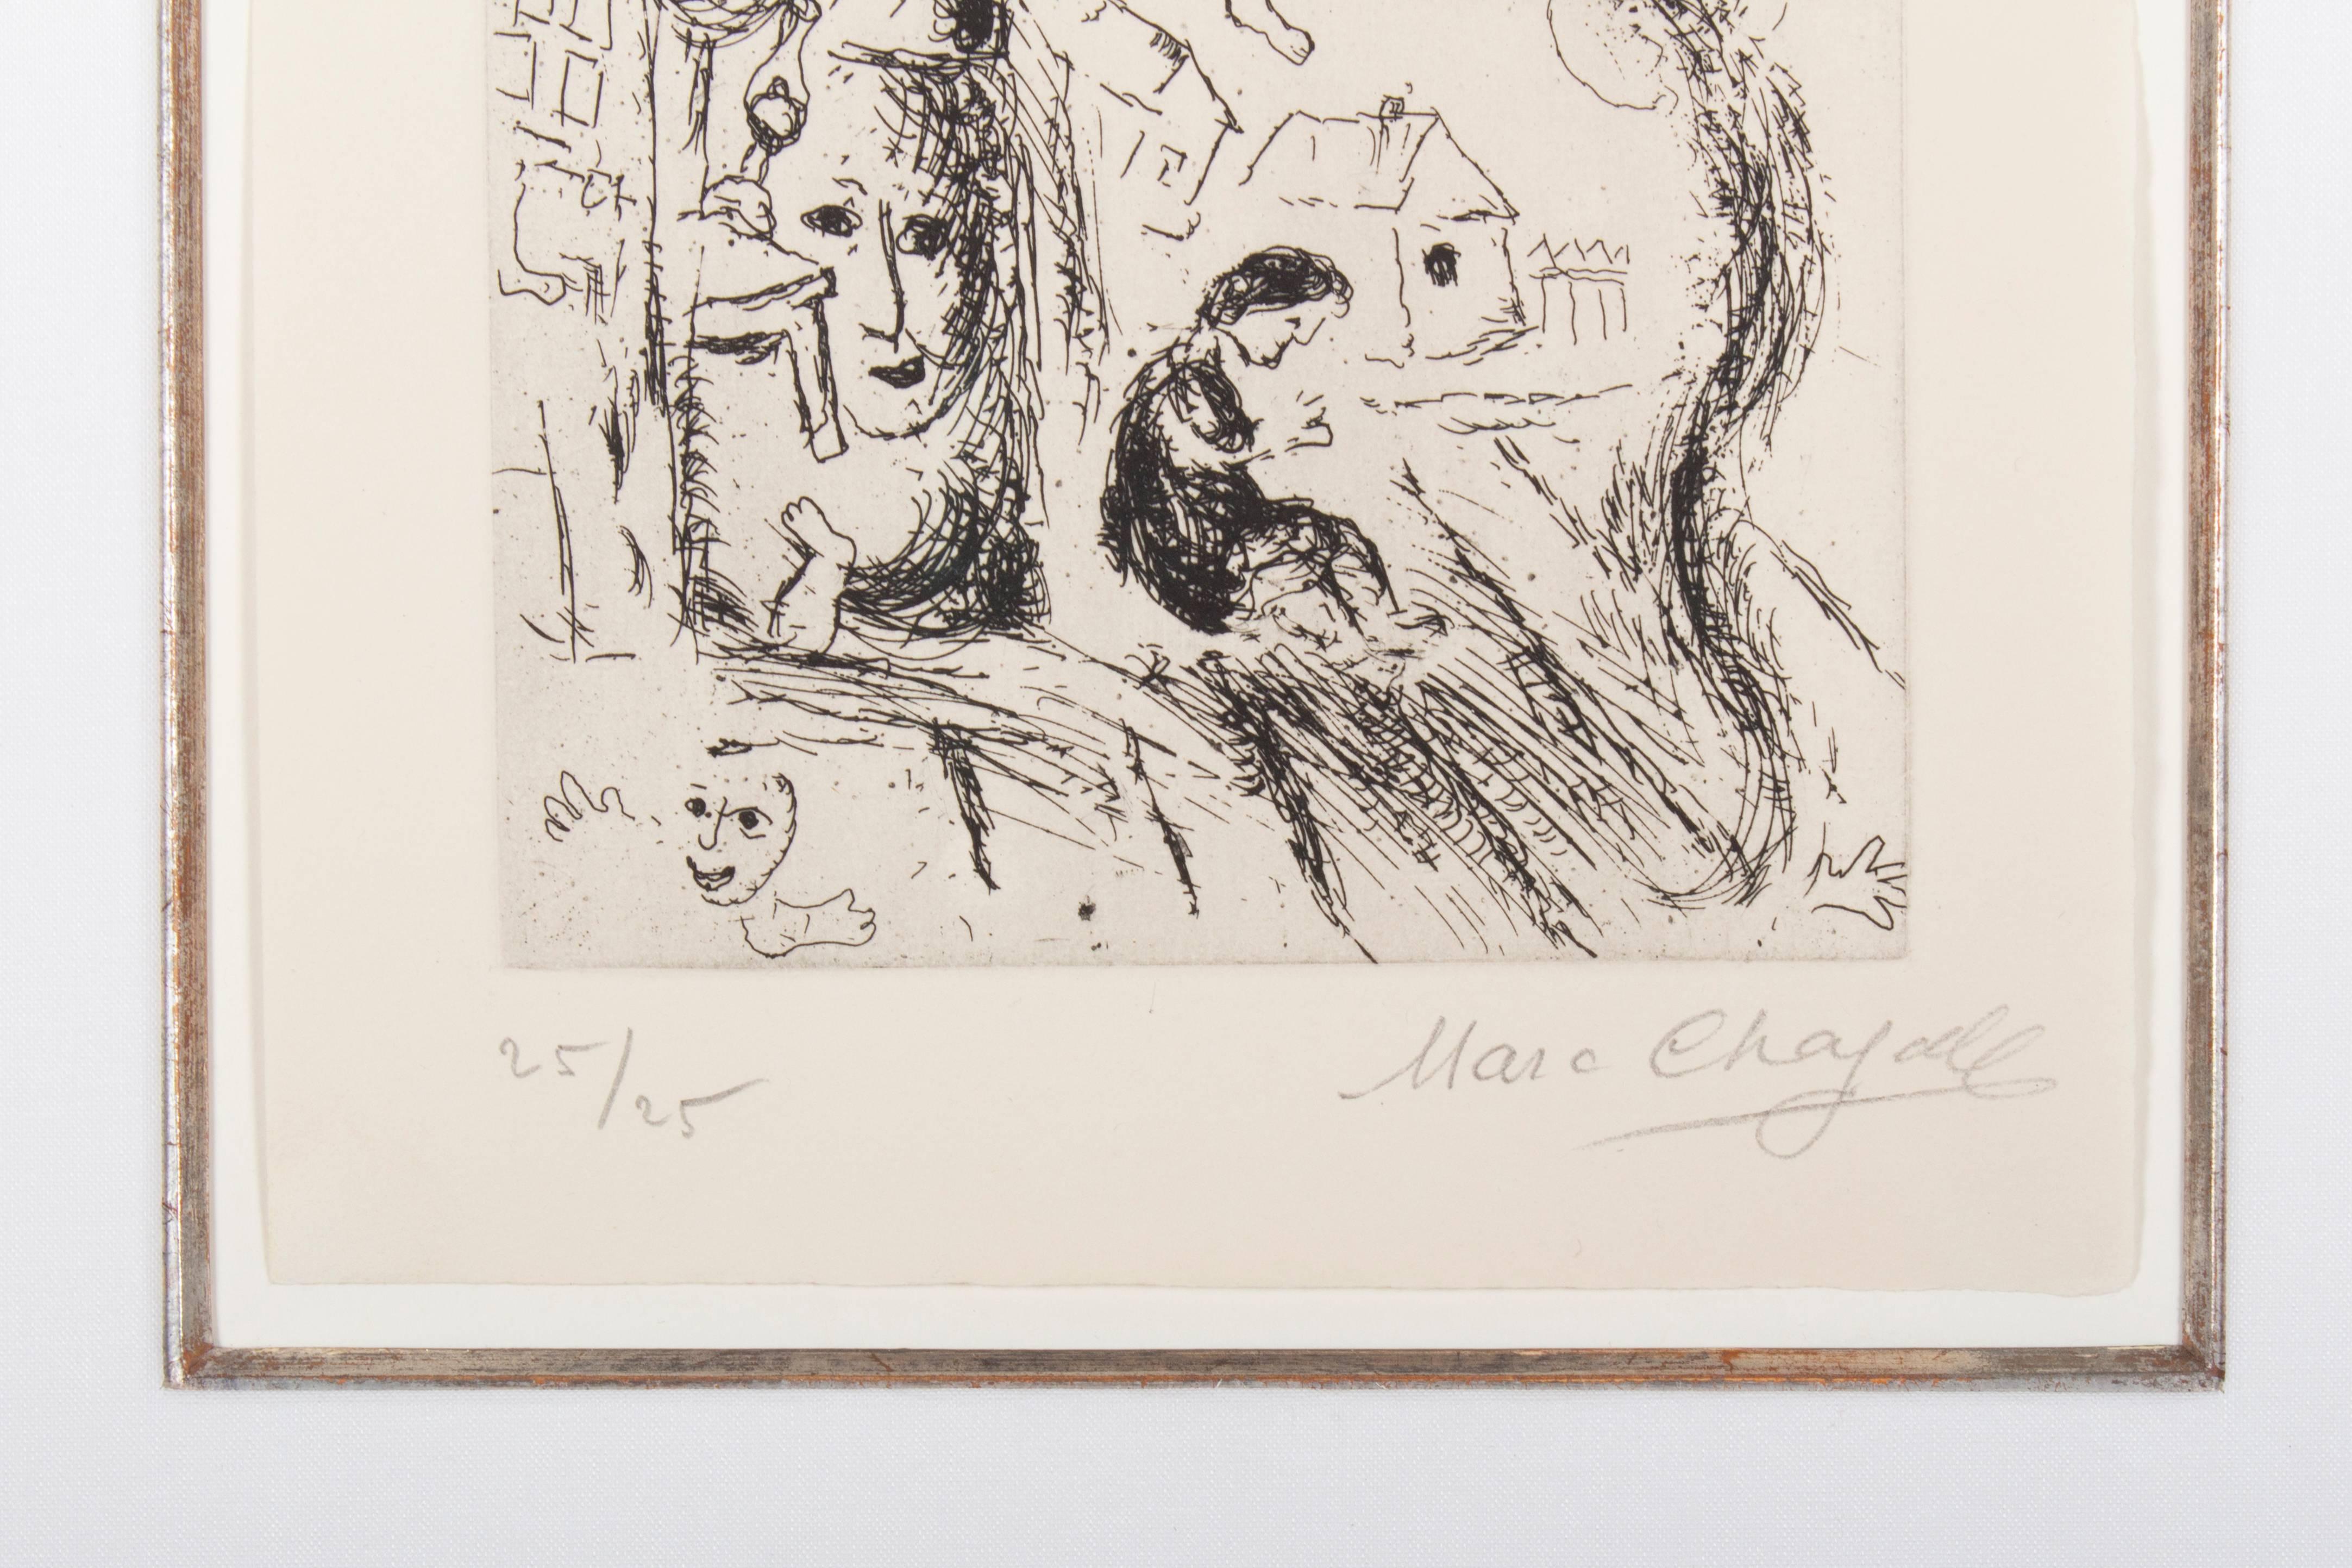 Lettre à Marc Chagall for Gallery Maeght, Paris 1969 For Sale 1